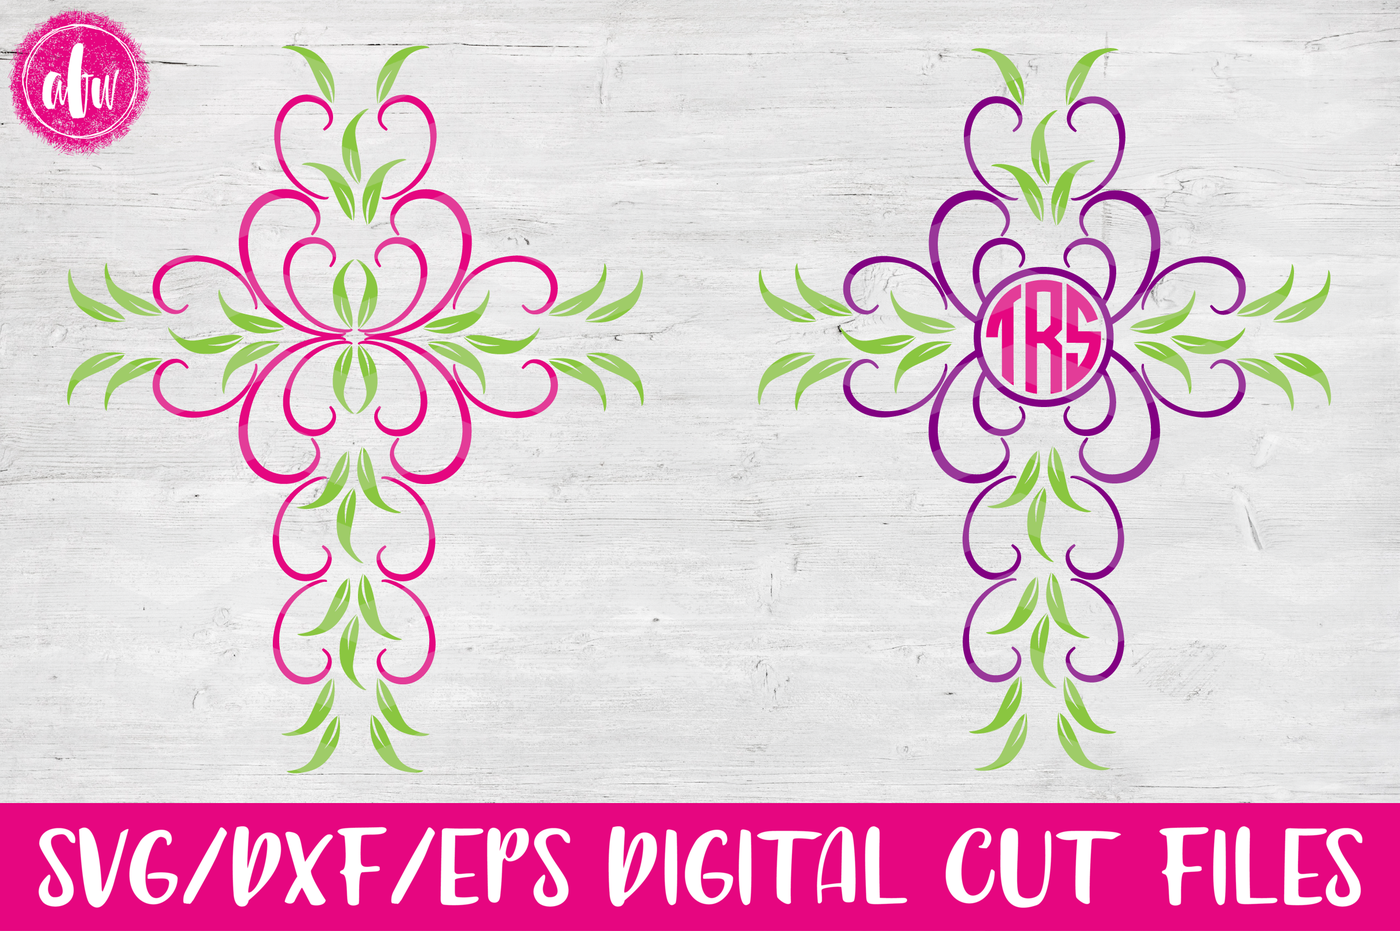 Download Monogram Cross - SVG, DXF, EPS Cut Files By AFW Designs | TheHungryJPEG.com